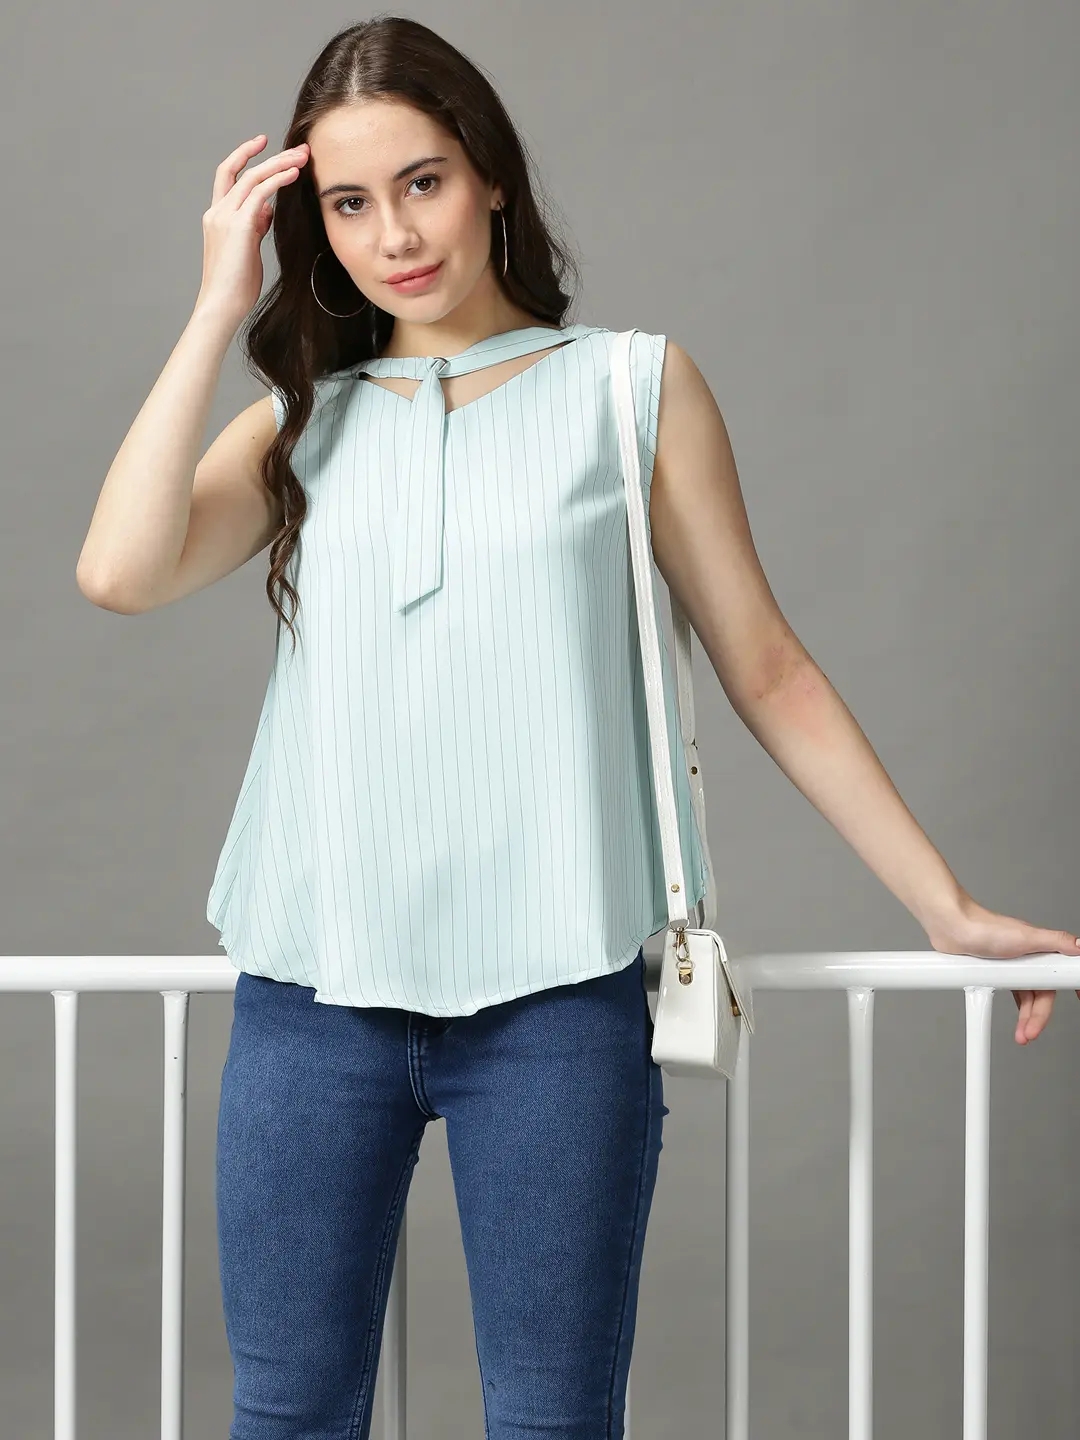 SHOWOFF Women's Sleeveless Tie-Up Neck Sea Green Striped Top